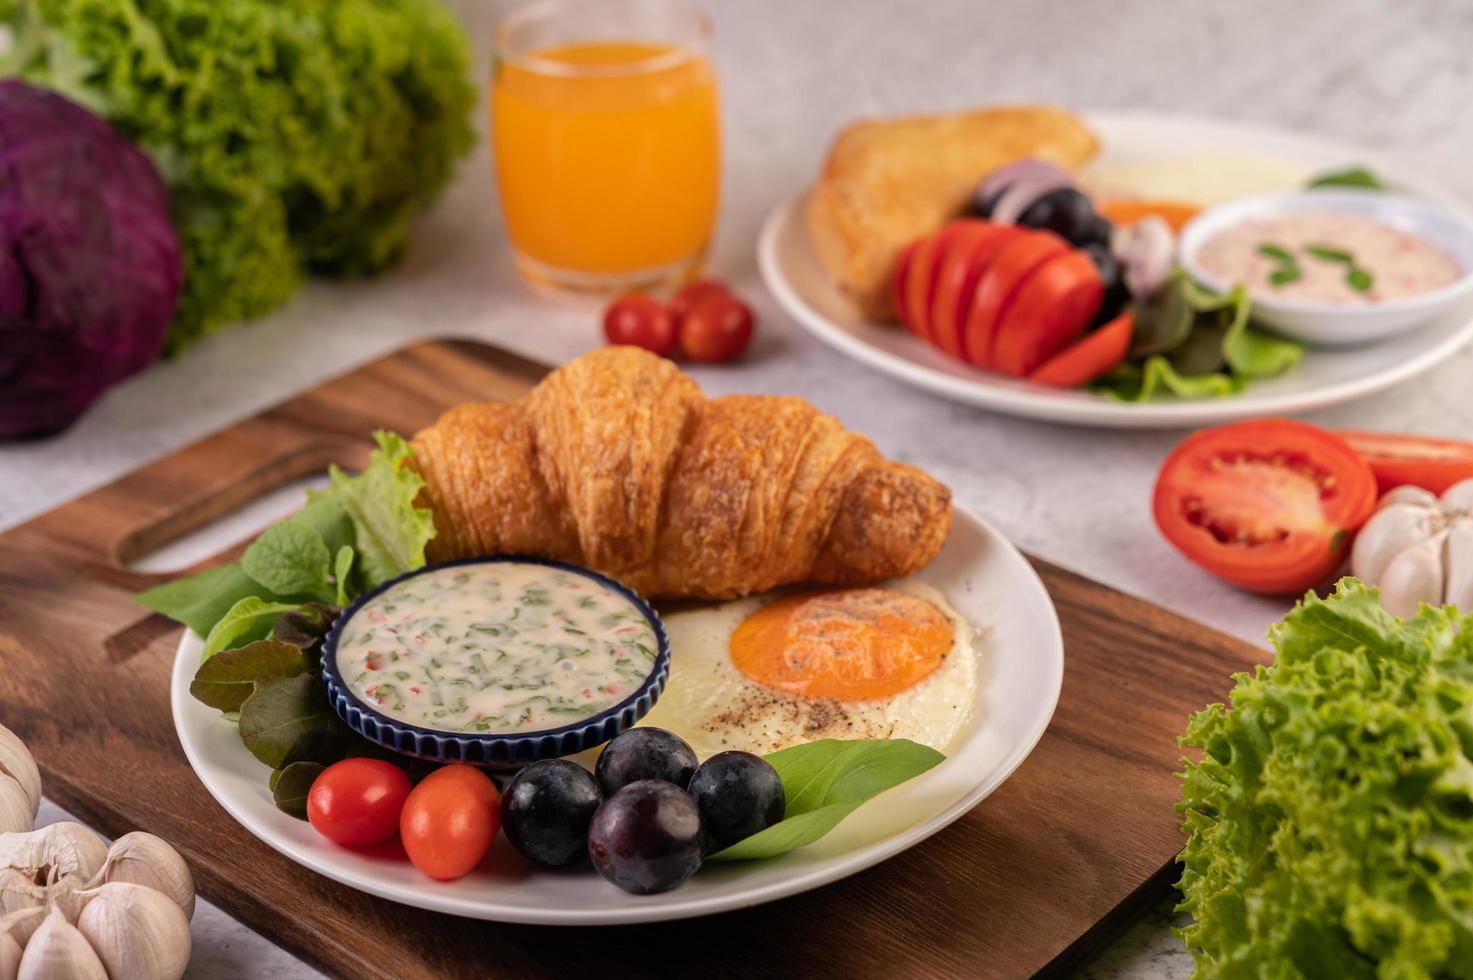 Croissant, fried egg, salad dressing, black grapes, and tomatoes photo